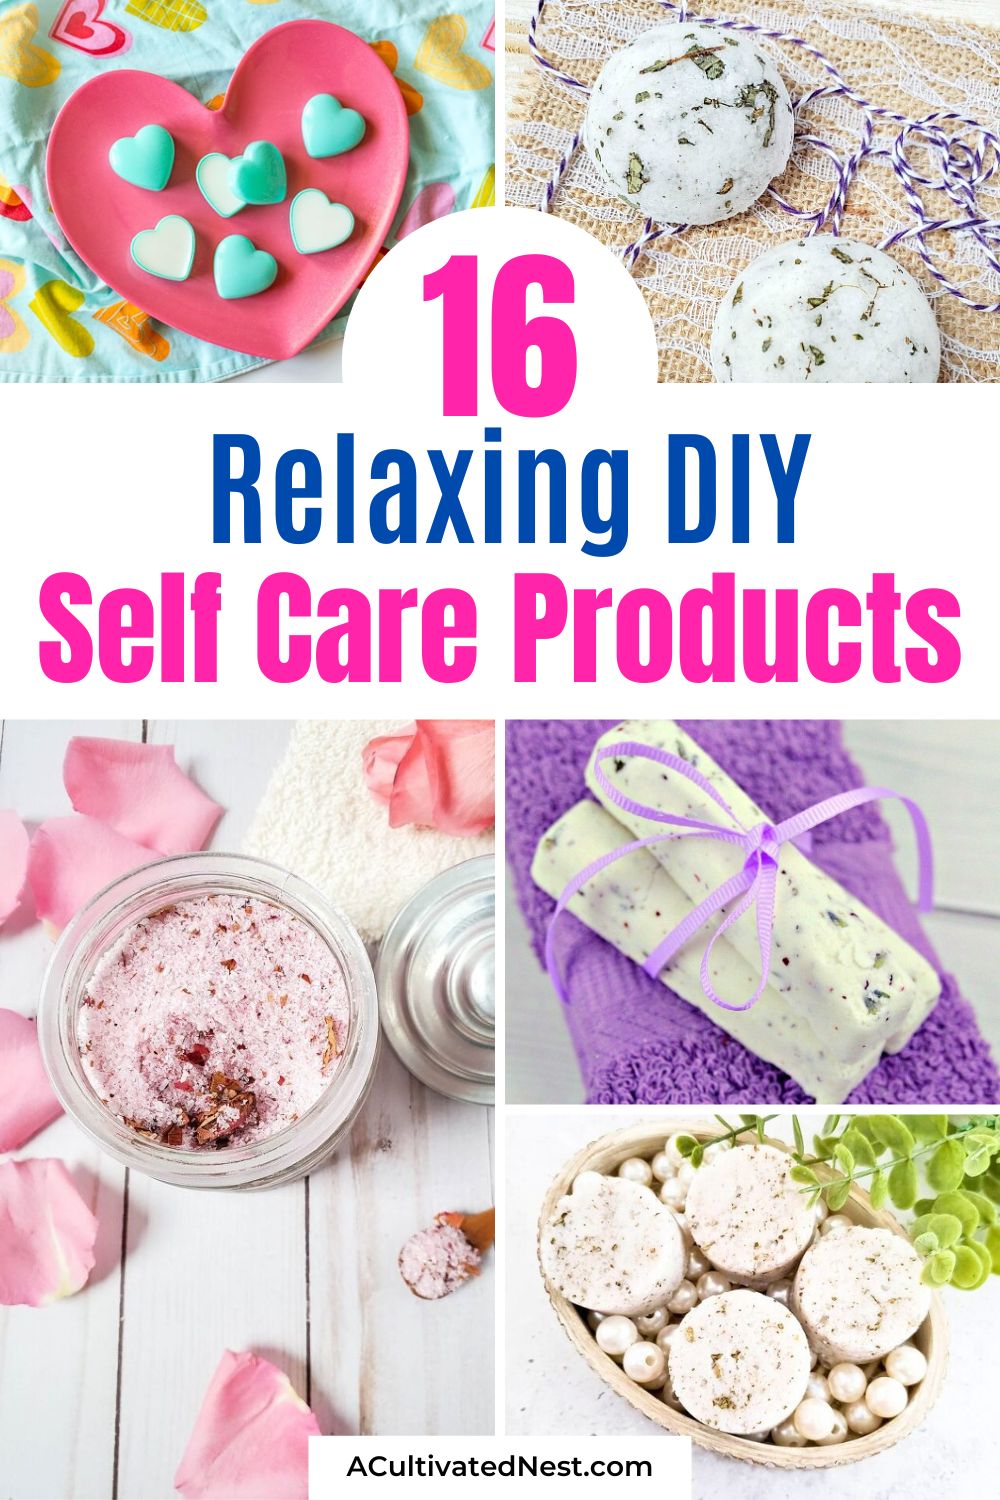 16 Relaxing DIY Self Care Products- Unlock relaxation at home with our roundup of relaxing DIY self care products. Discover how to make luxurious sugar scrubs, moisturizing lotions, and more – great for daily self-care or as thoughtful gifts that show you care! | #beautyProducts #DIY #diyBeauty #mothersDay#ACultivatedNest